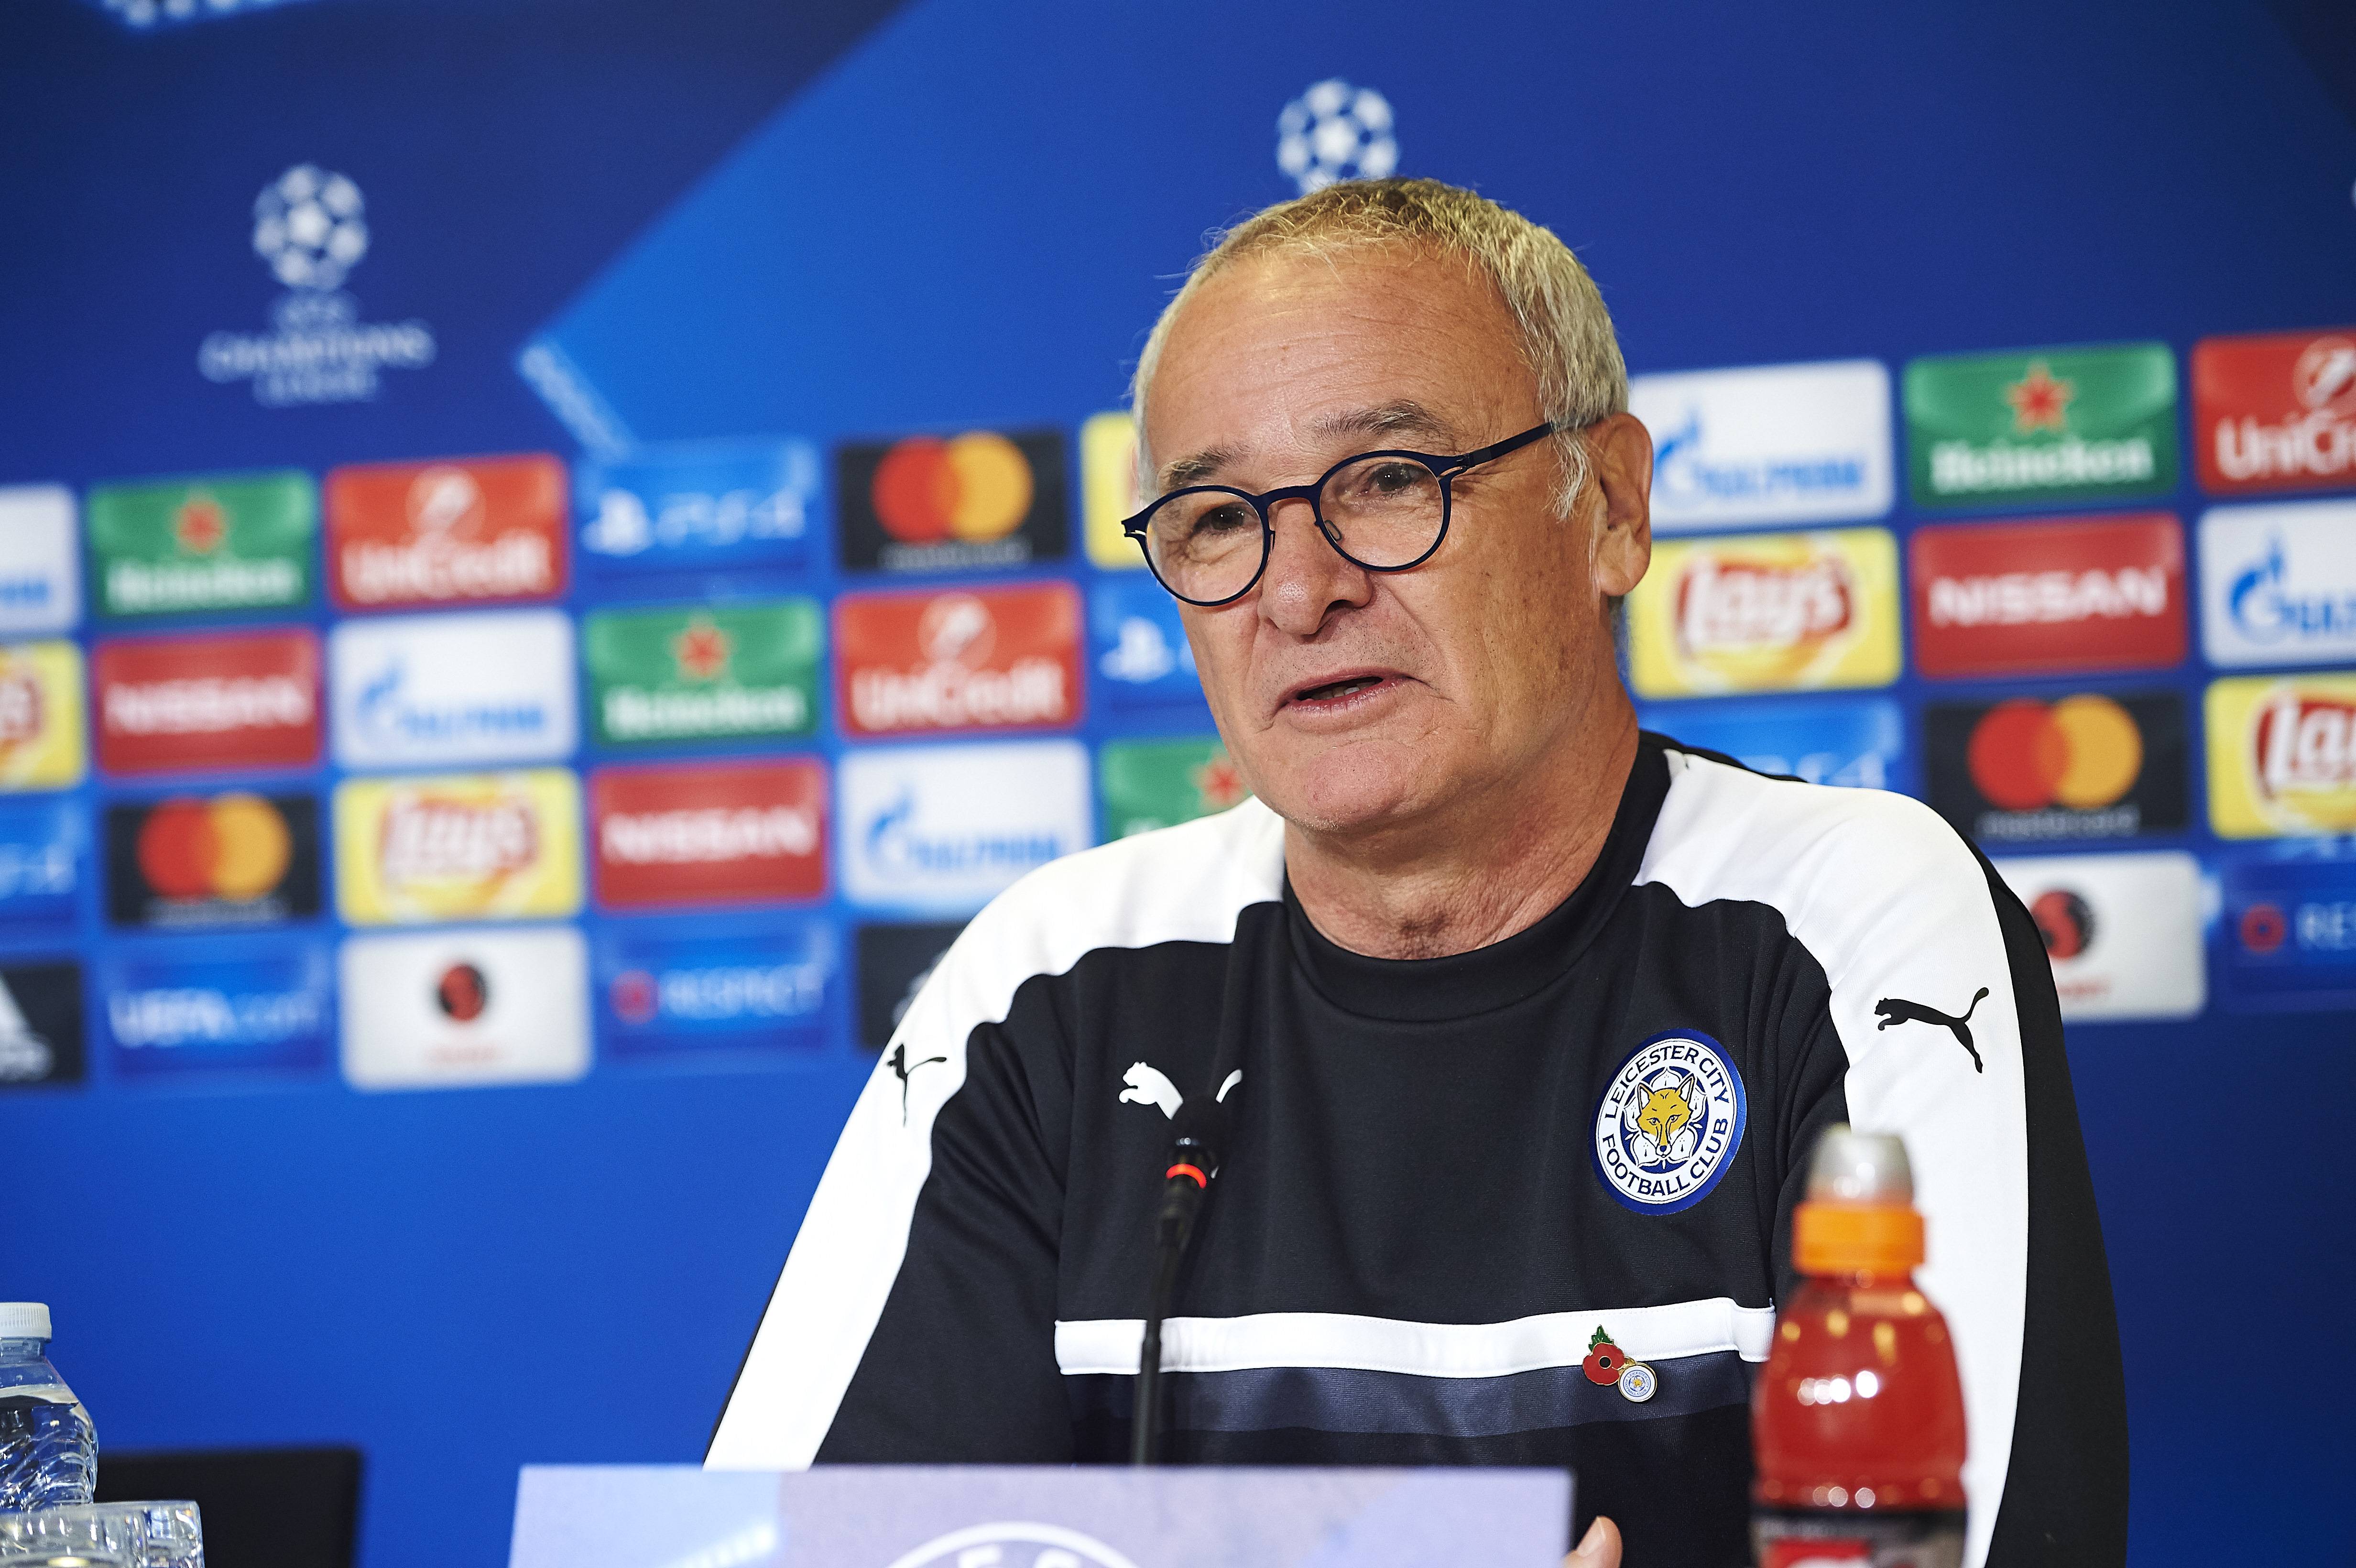 Dilly Ding Dilly Dong! Ranieri Returns to Prem with Watford